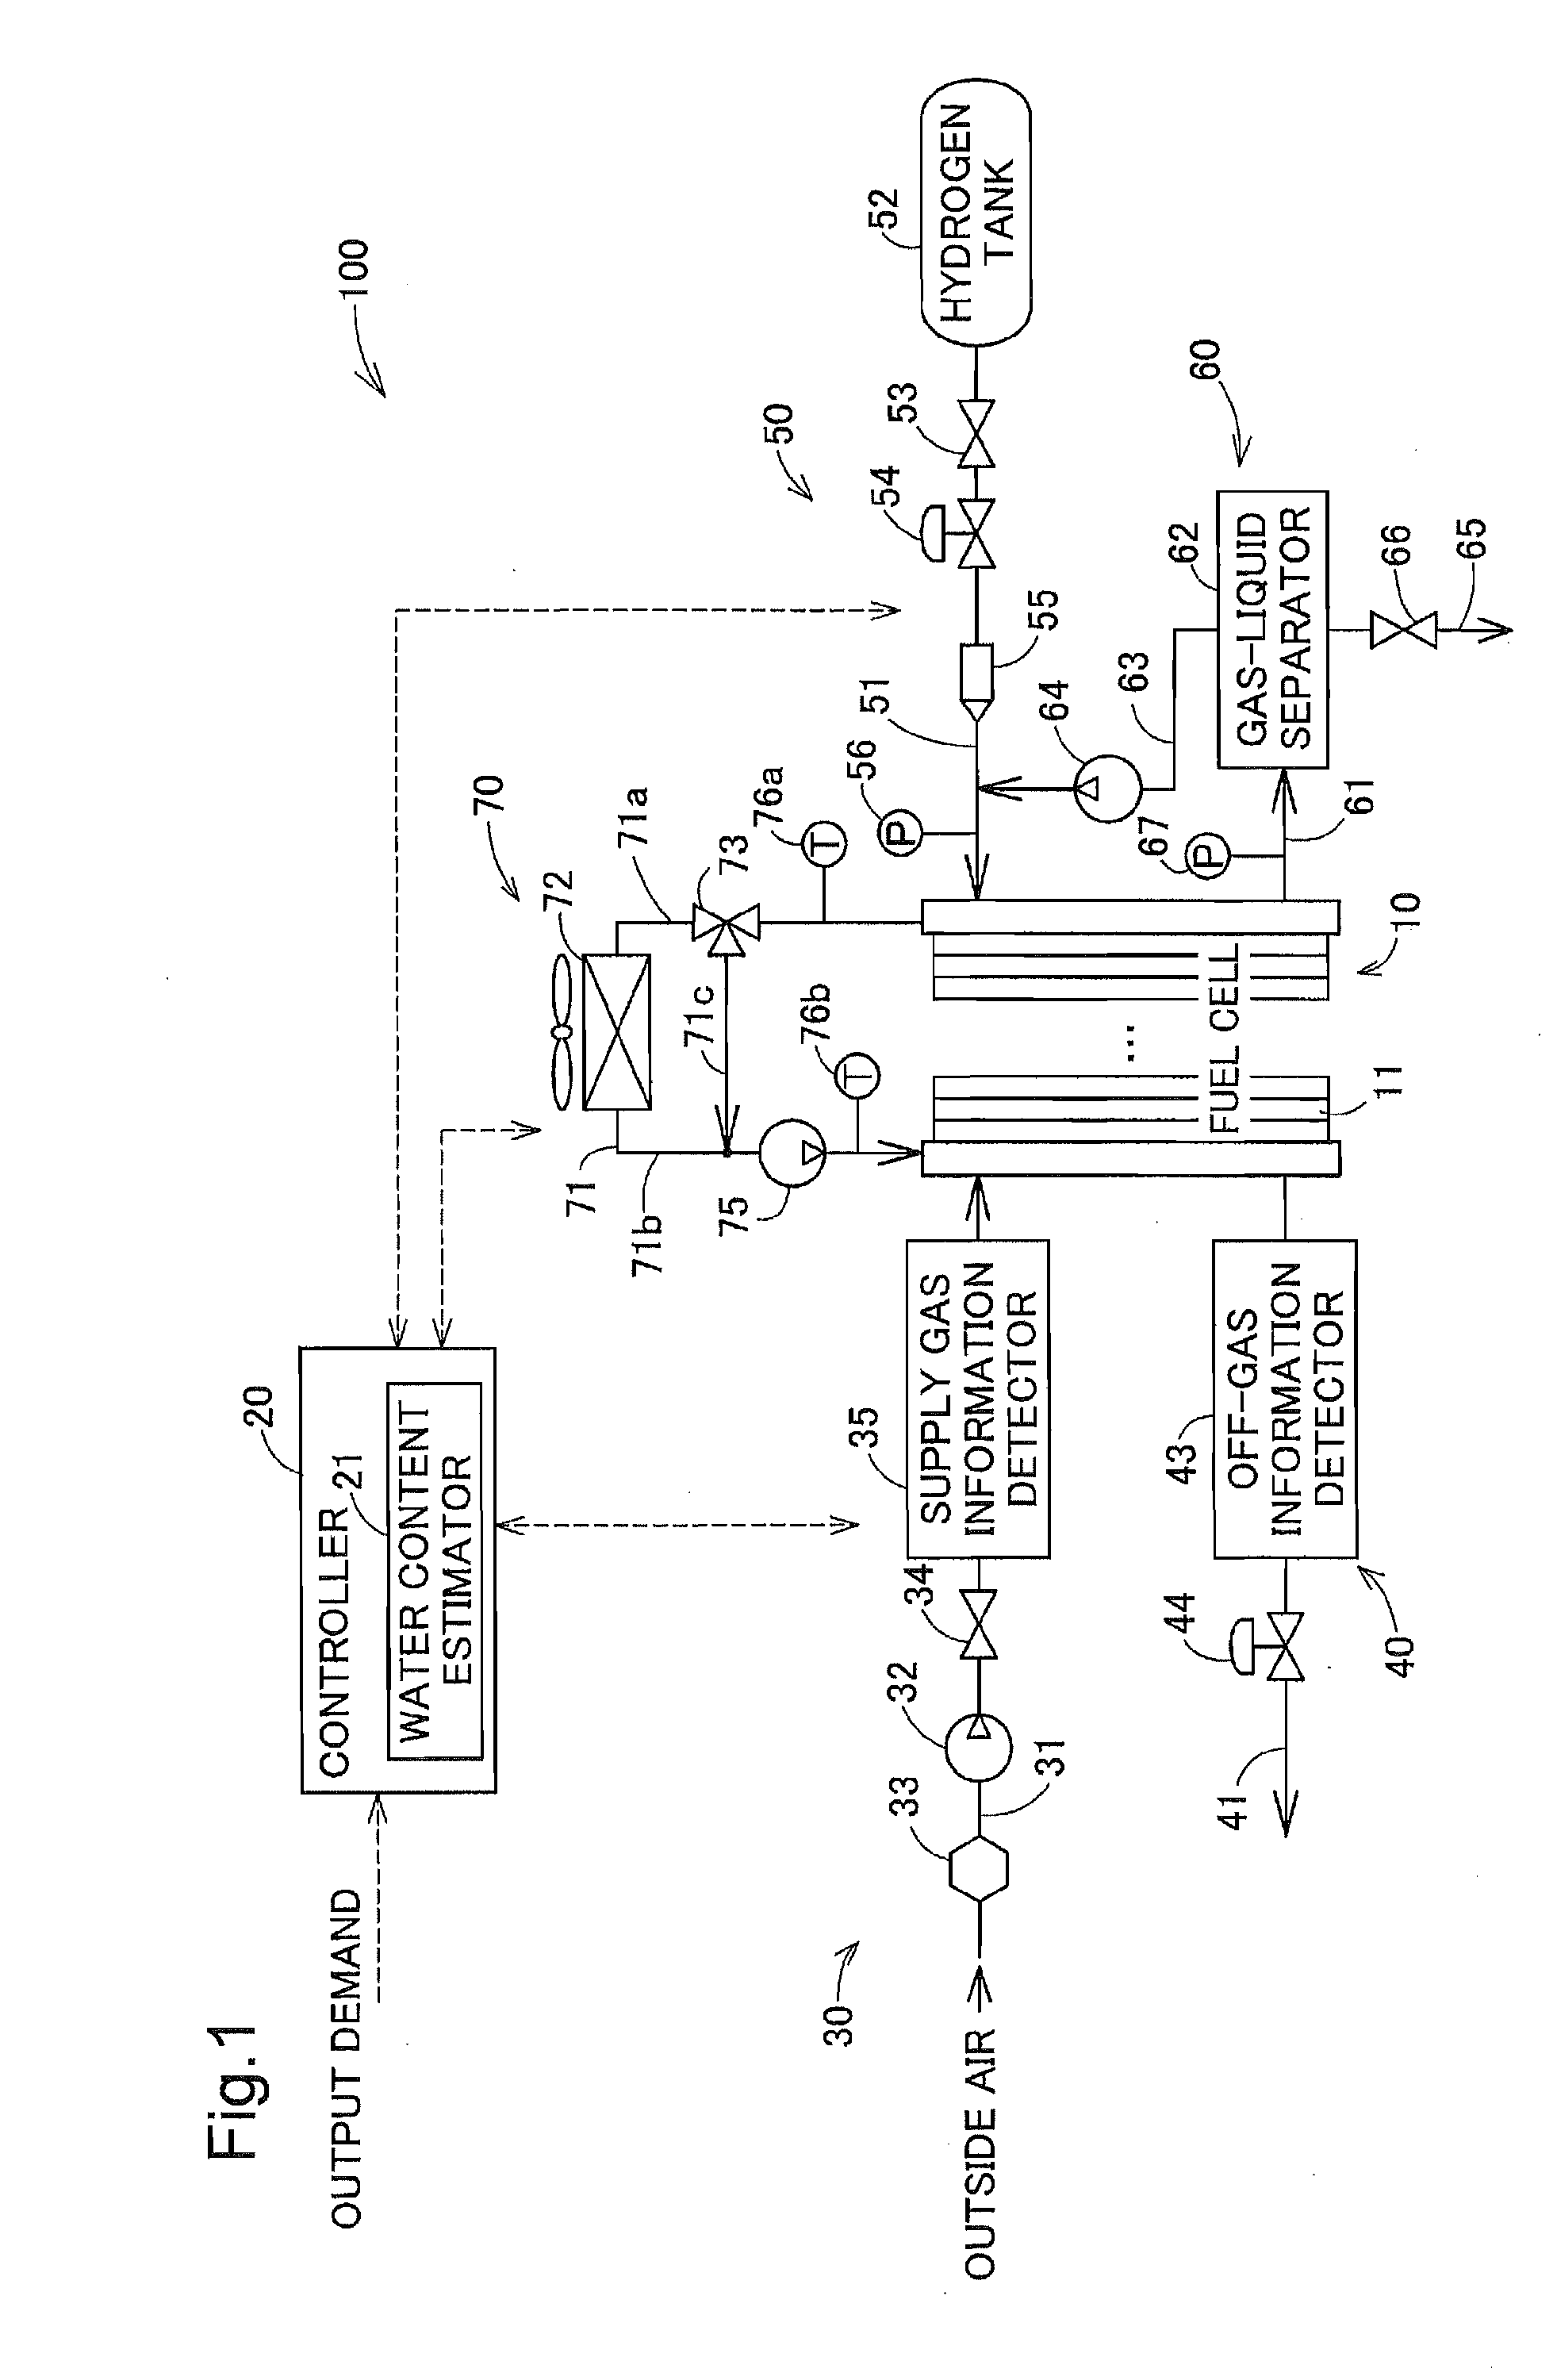 Method of estimating amiount of liquid water in fuel cell, method of estimating amount of liquid water discharged from fuel cell, estimation apparatus of liquid water amount in fuel cell and fuel cell system